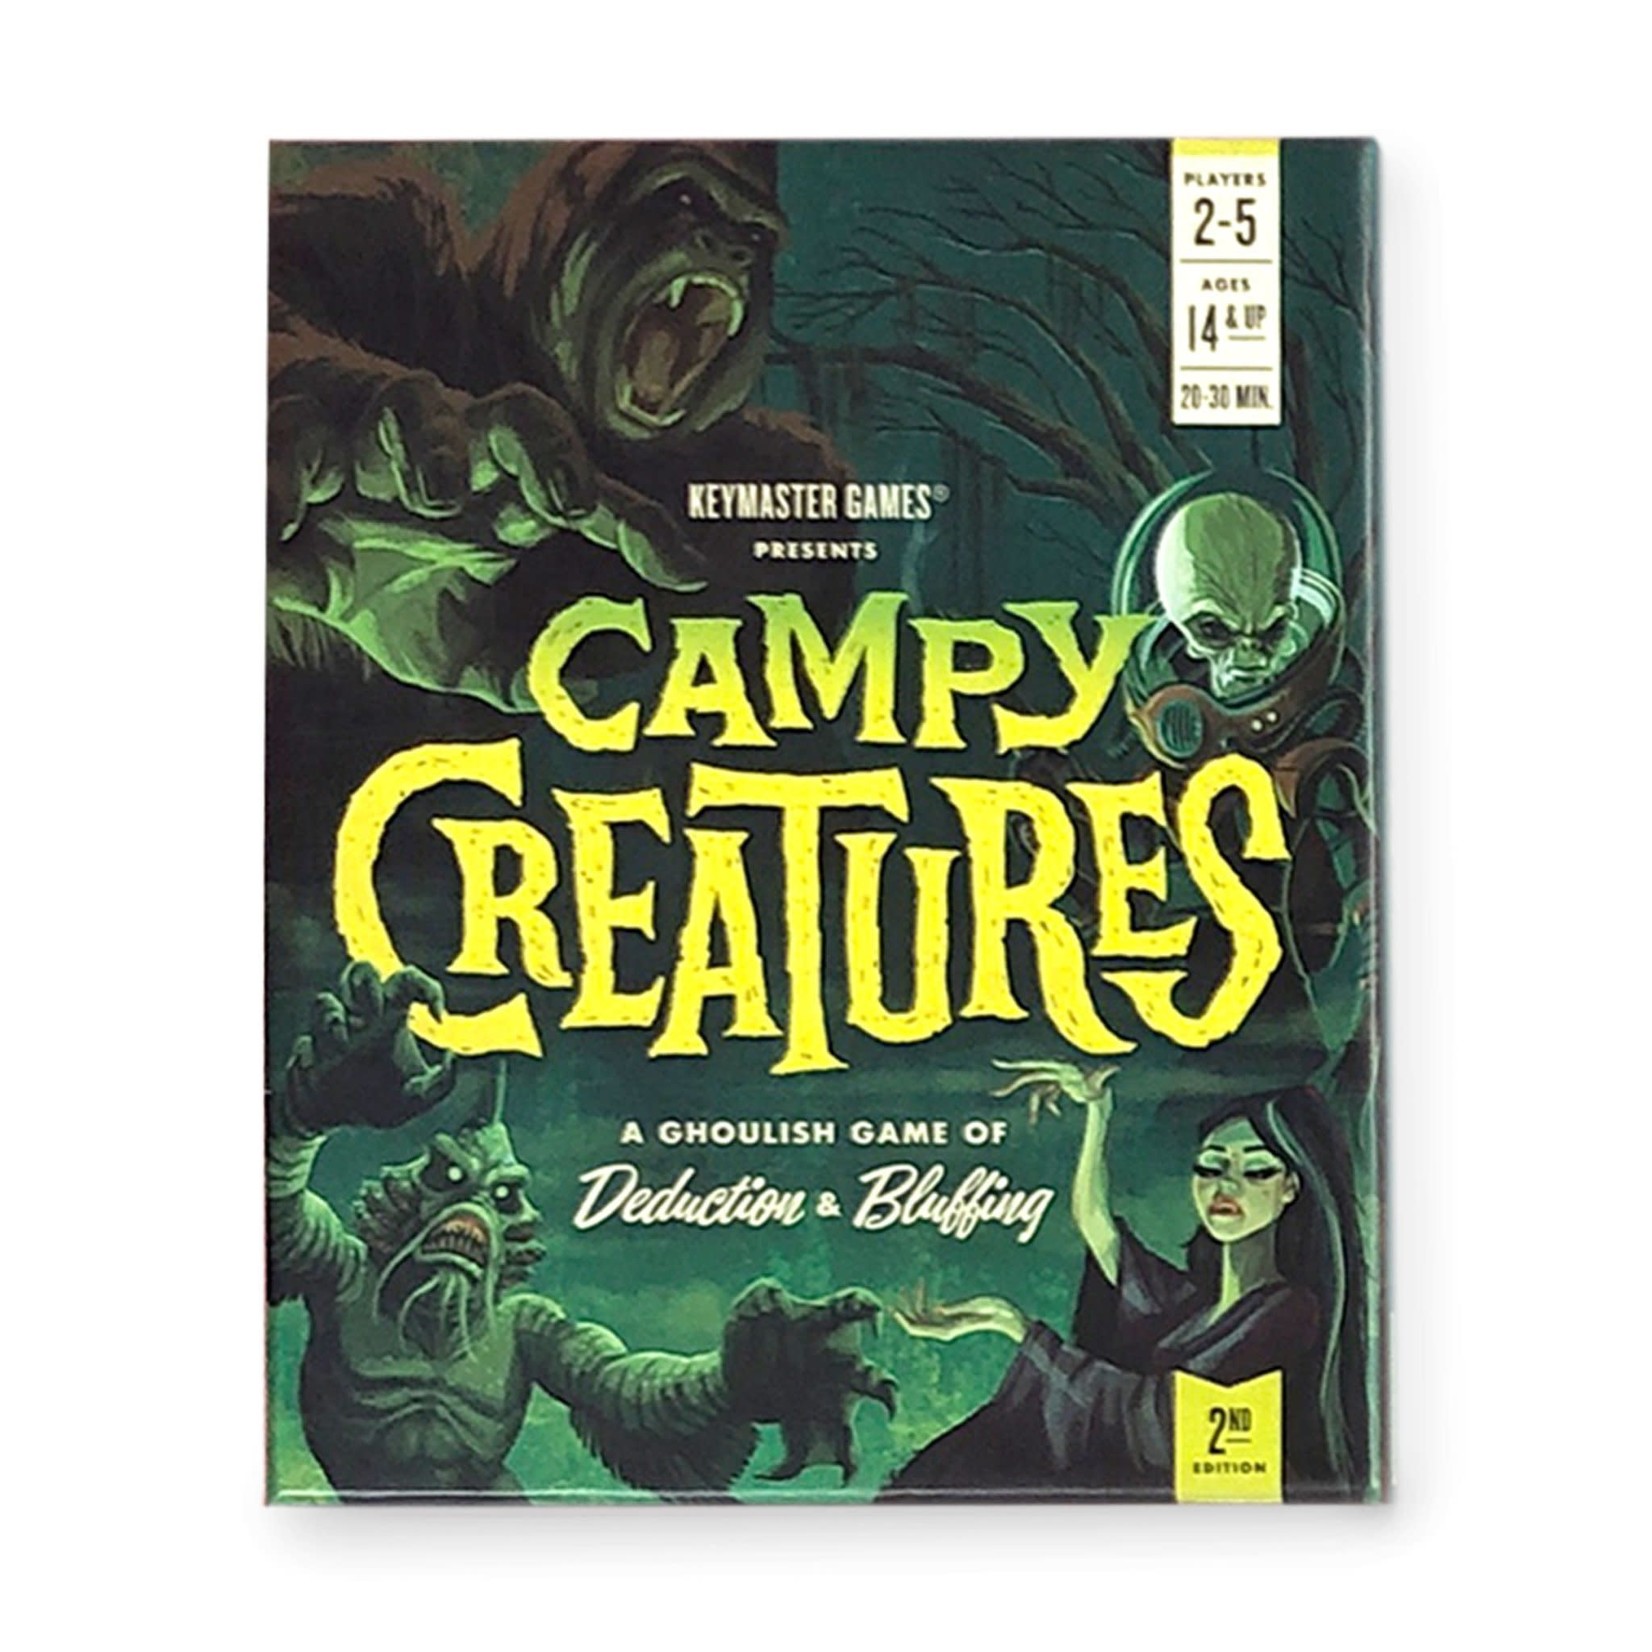 Keymaster Games Campy Creatures 2nd Edition